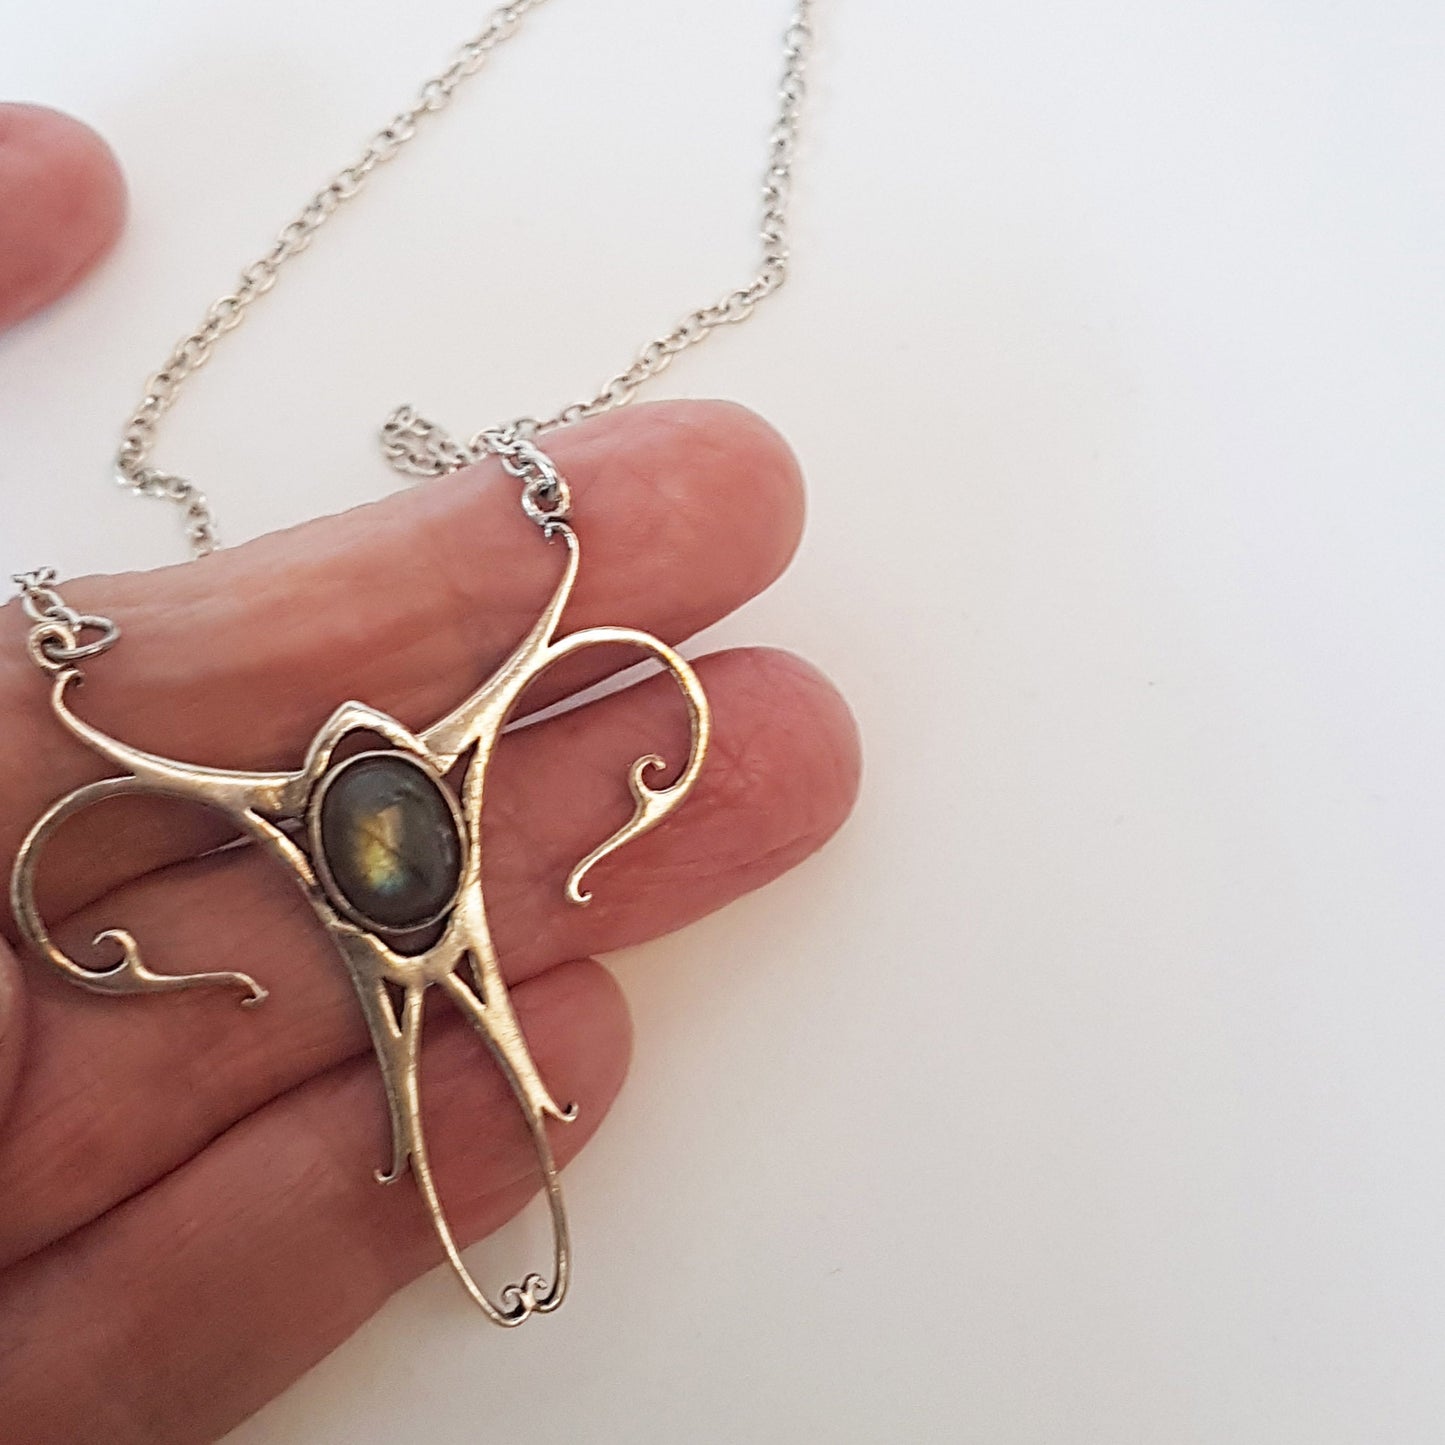 Silver Celtic antler pendant with a large labradorite stone. Spiritual symbol of the forest realm. Esoteric, metaphysical, New Age jewelry. - Vintage India Ca